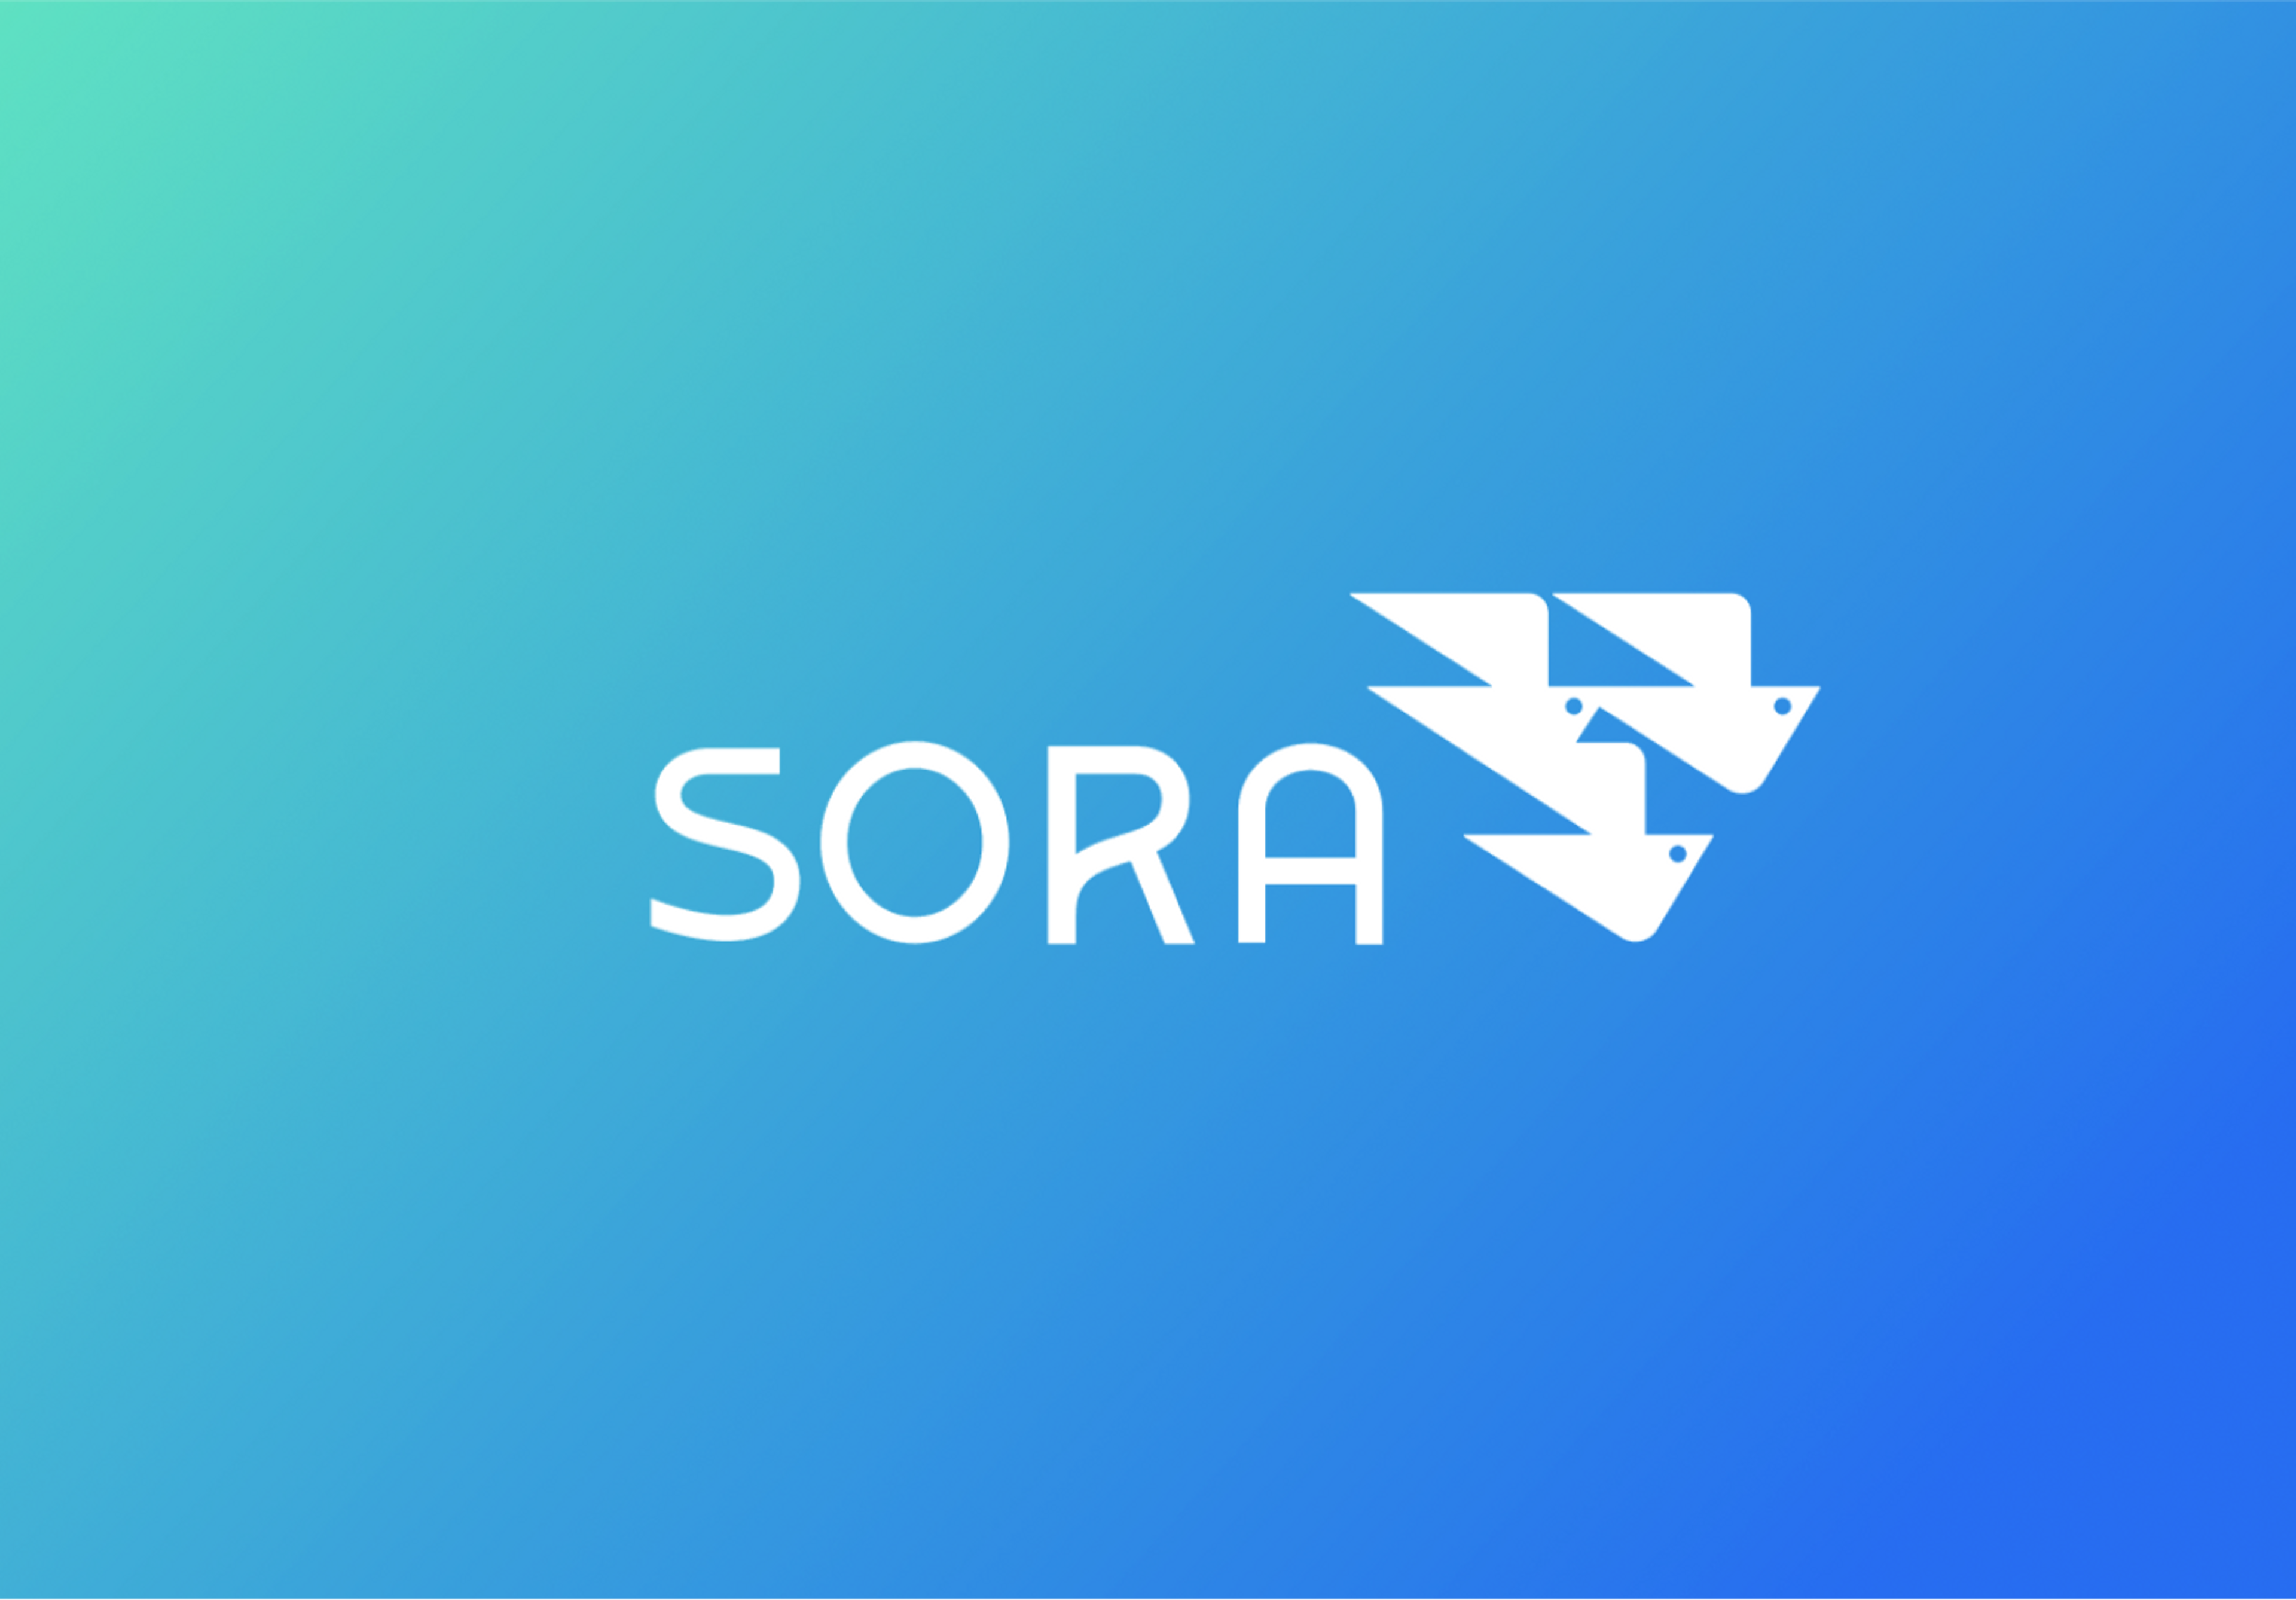 White logo with SORA wordmark and three birds on a teal green to blue gradient background